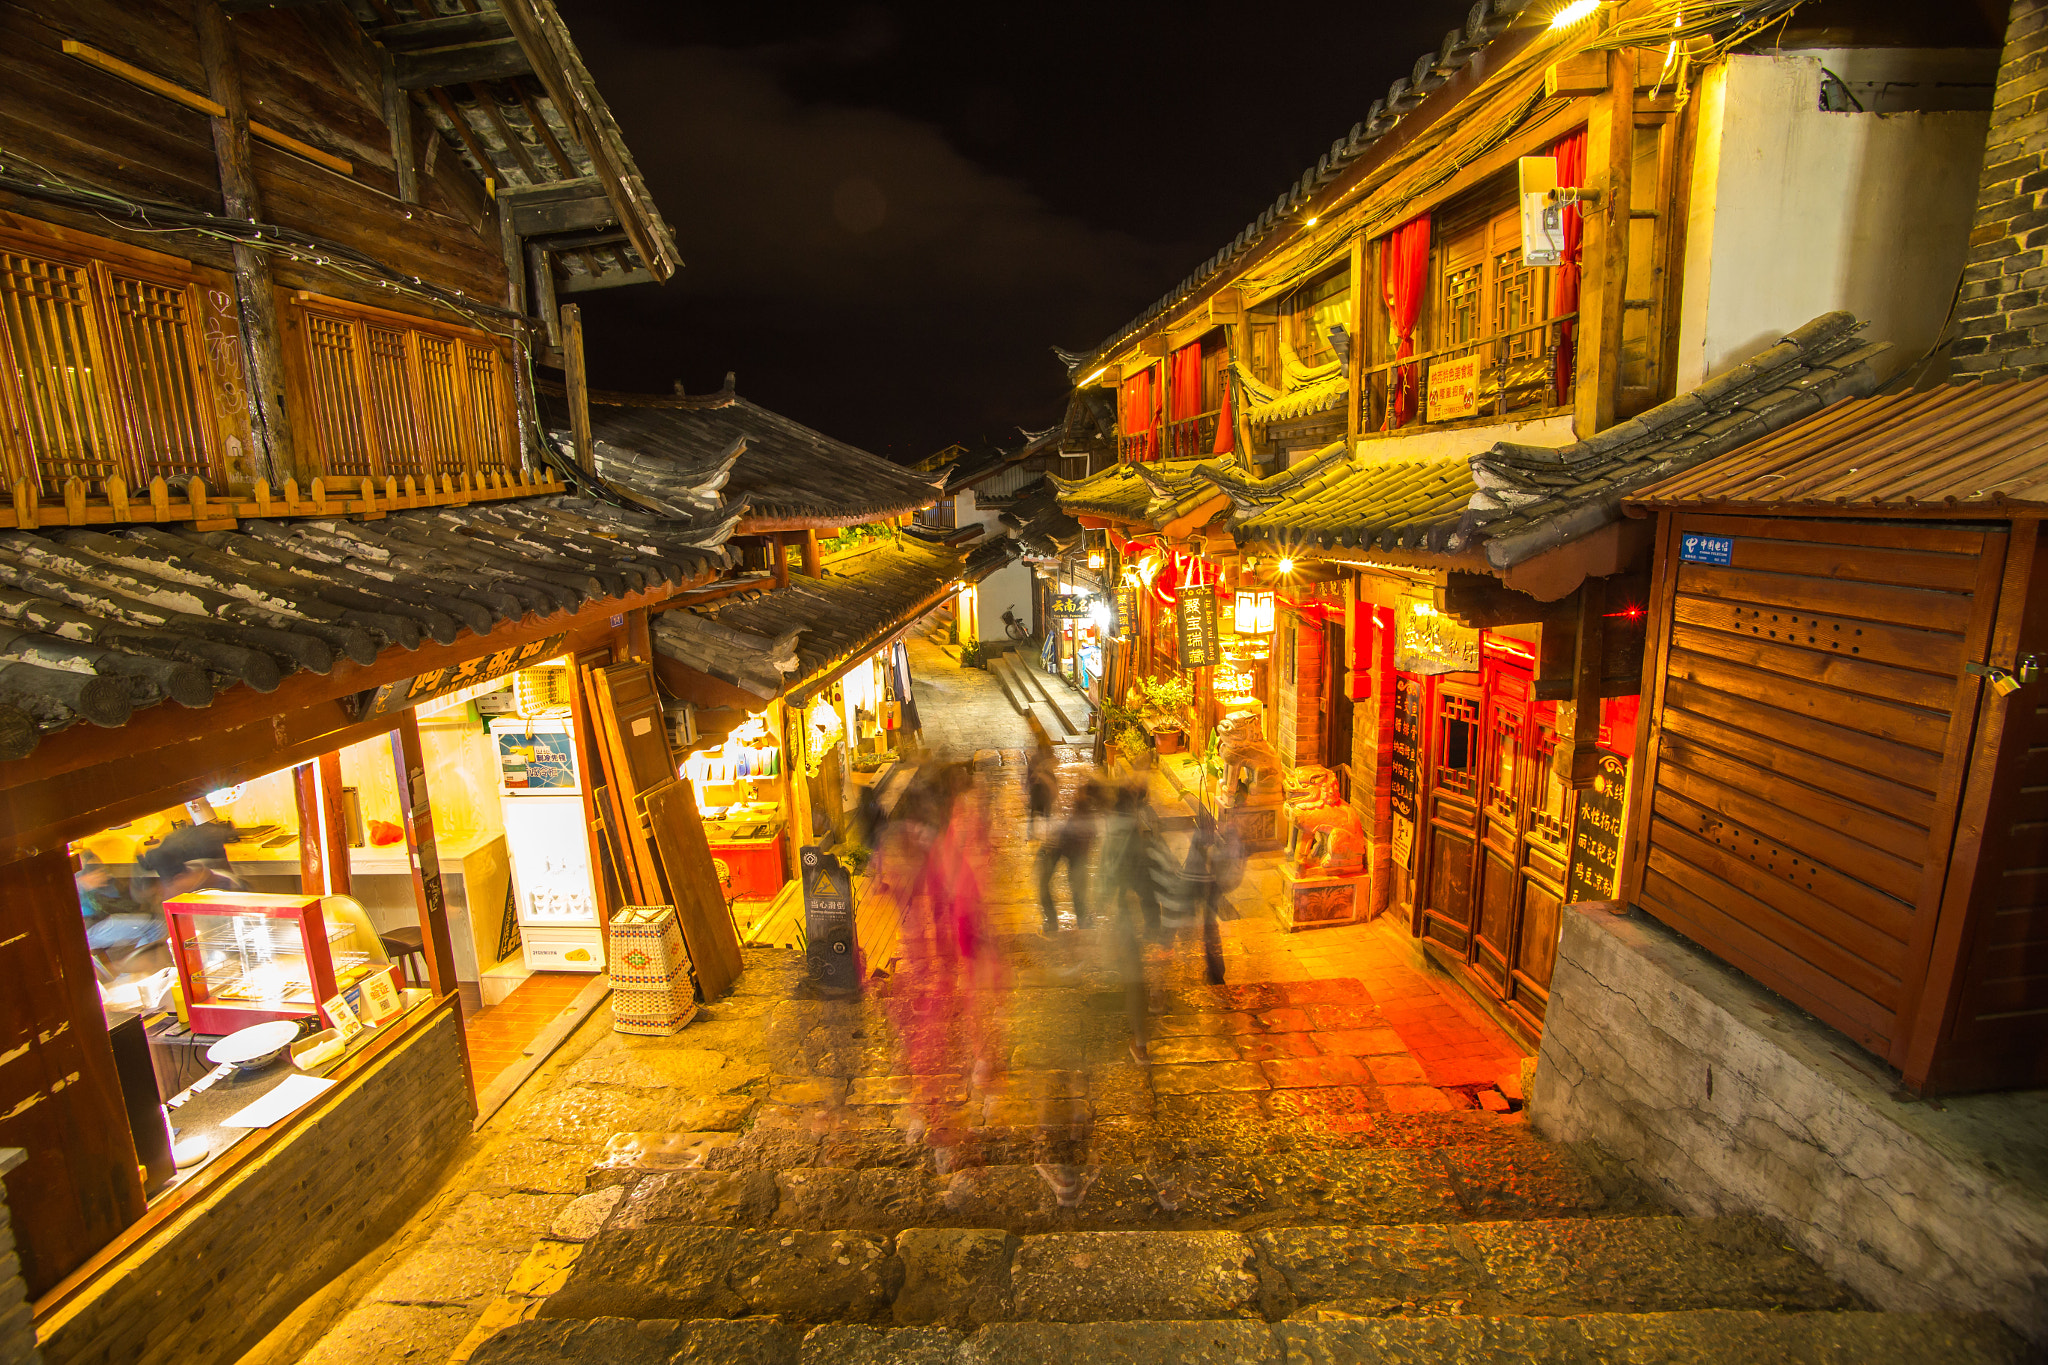 Canon EOS 6D + Tamron SP AF 17-35mm F2.8-4 Di LD Aspherical (IF) sample photo. The old town of dayan, lijiang, china, at night photography